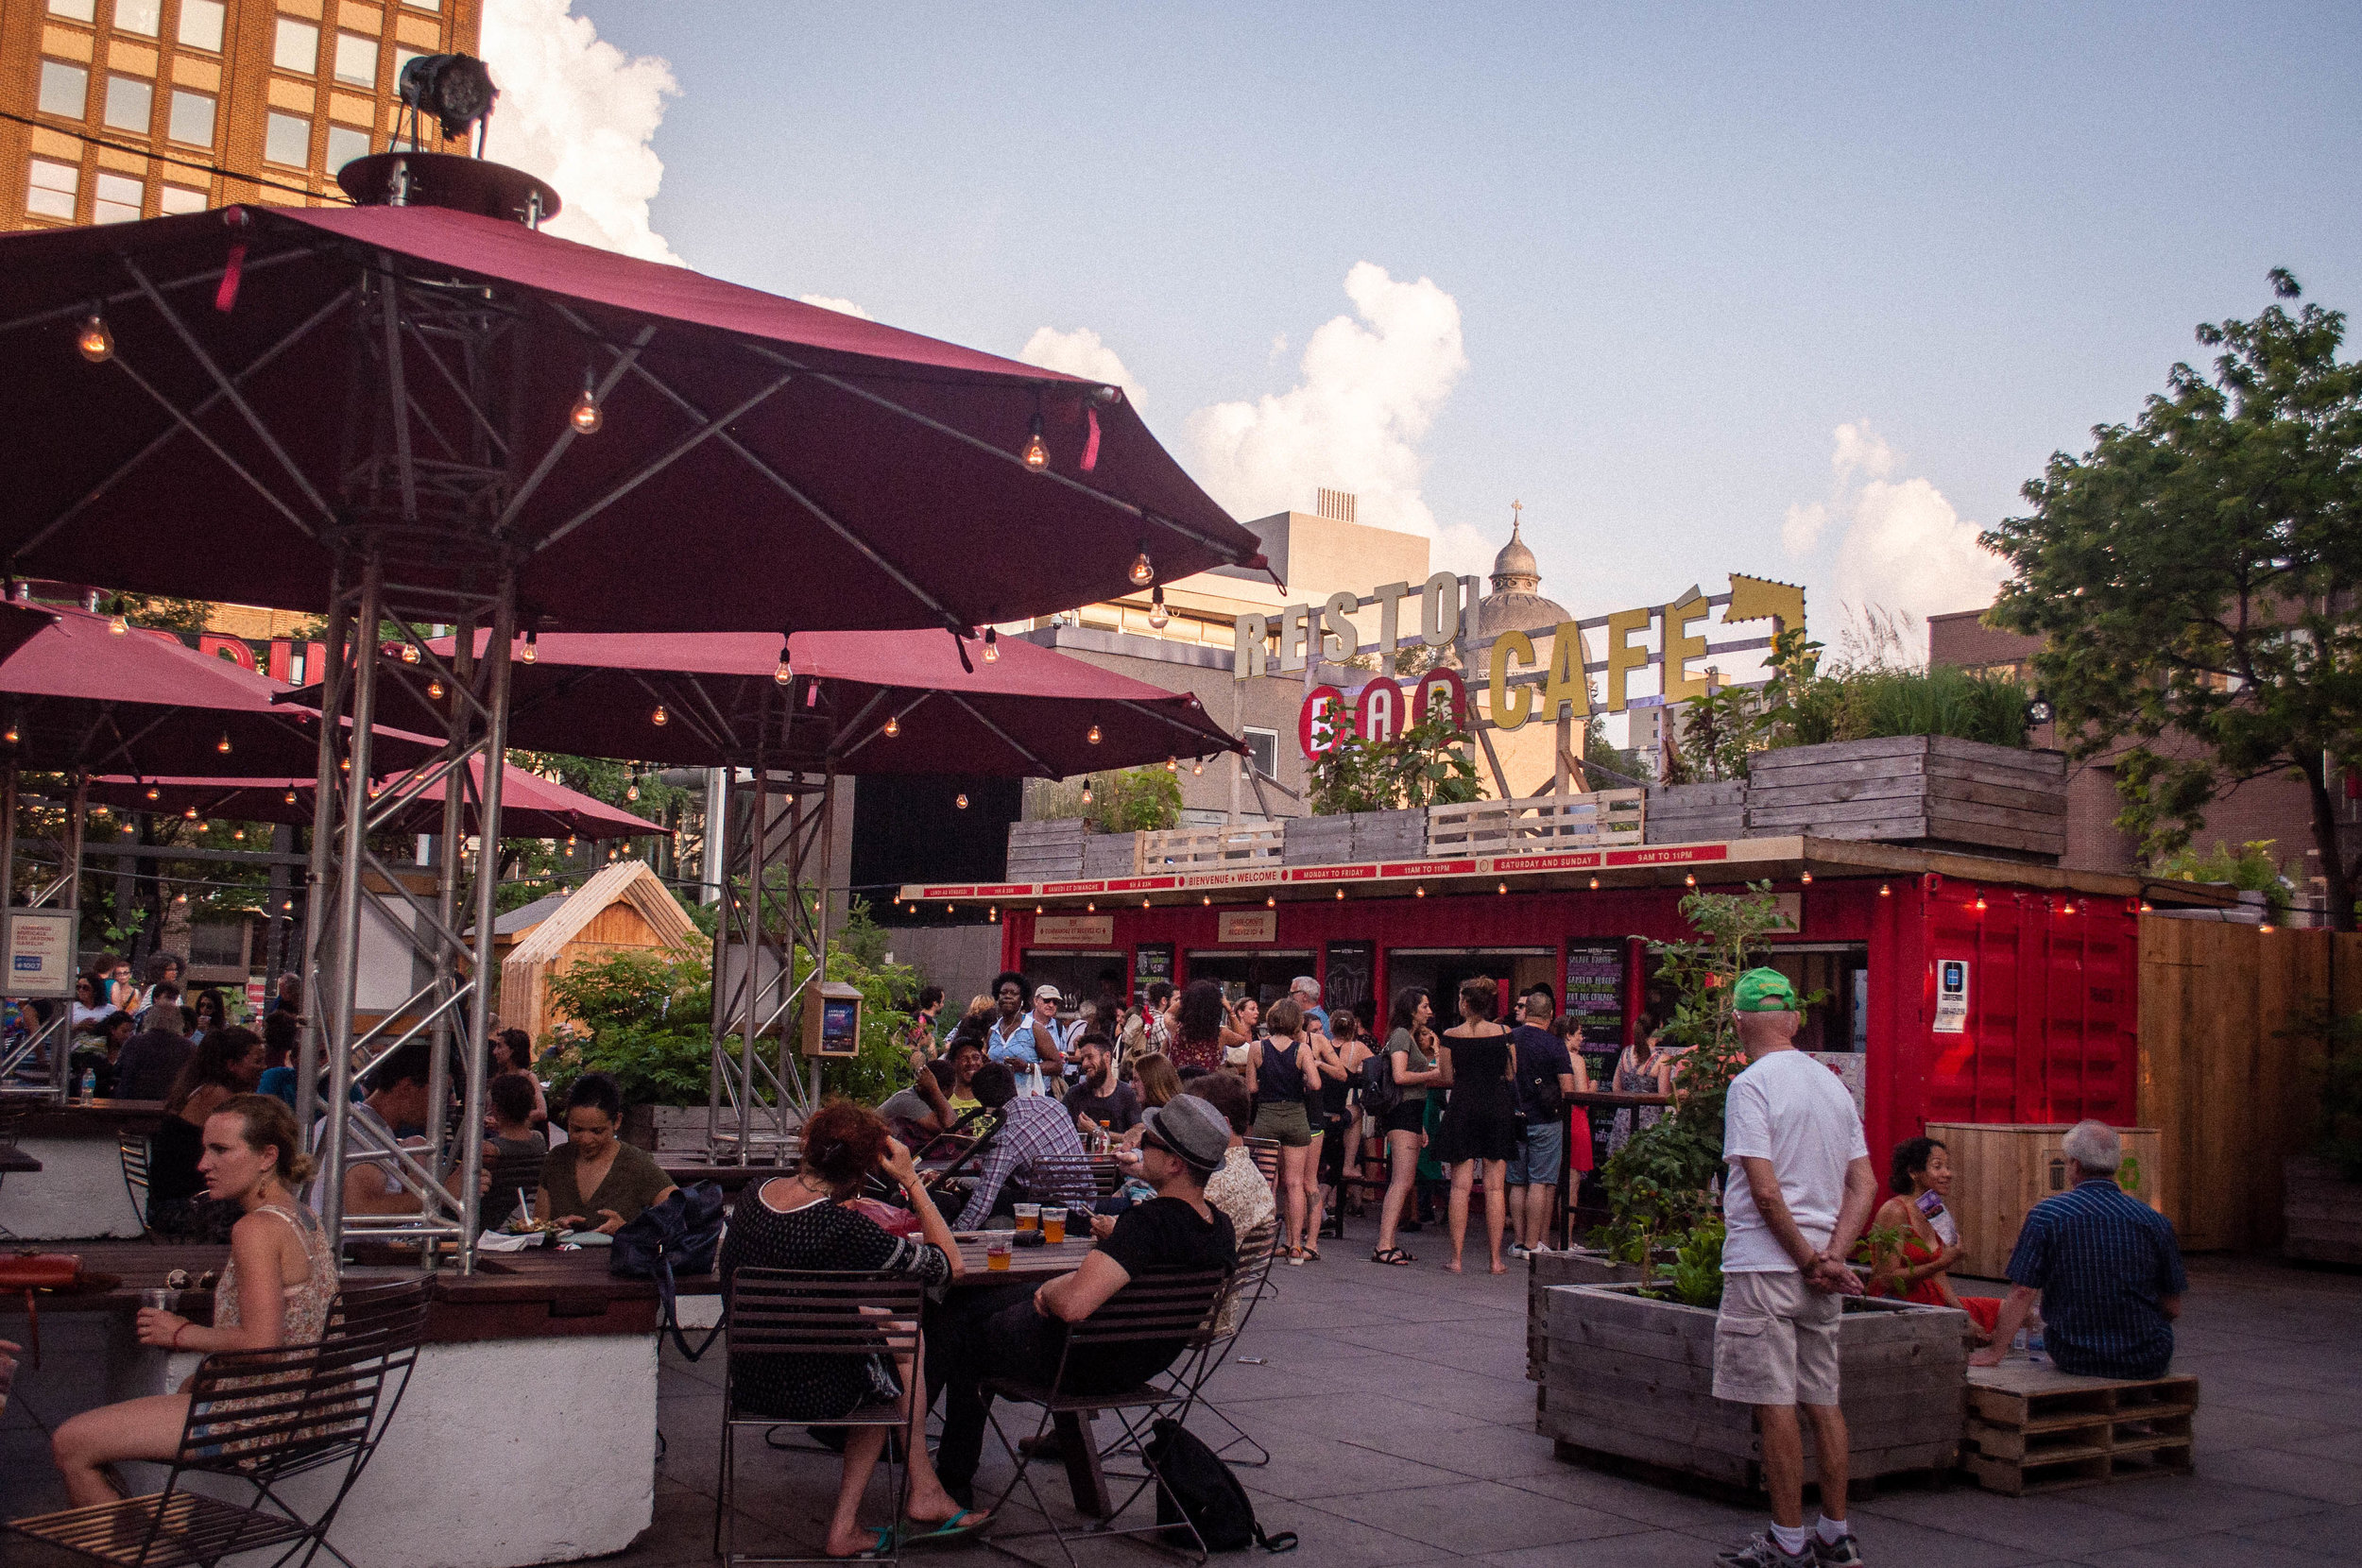 Jardins Gamelin terrace, one of the 6 original terraces to enjoy the summer in Montreal